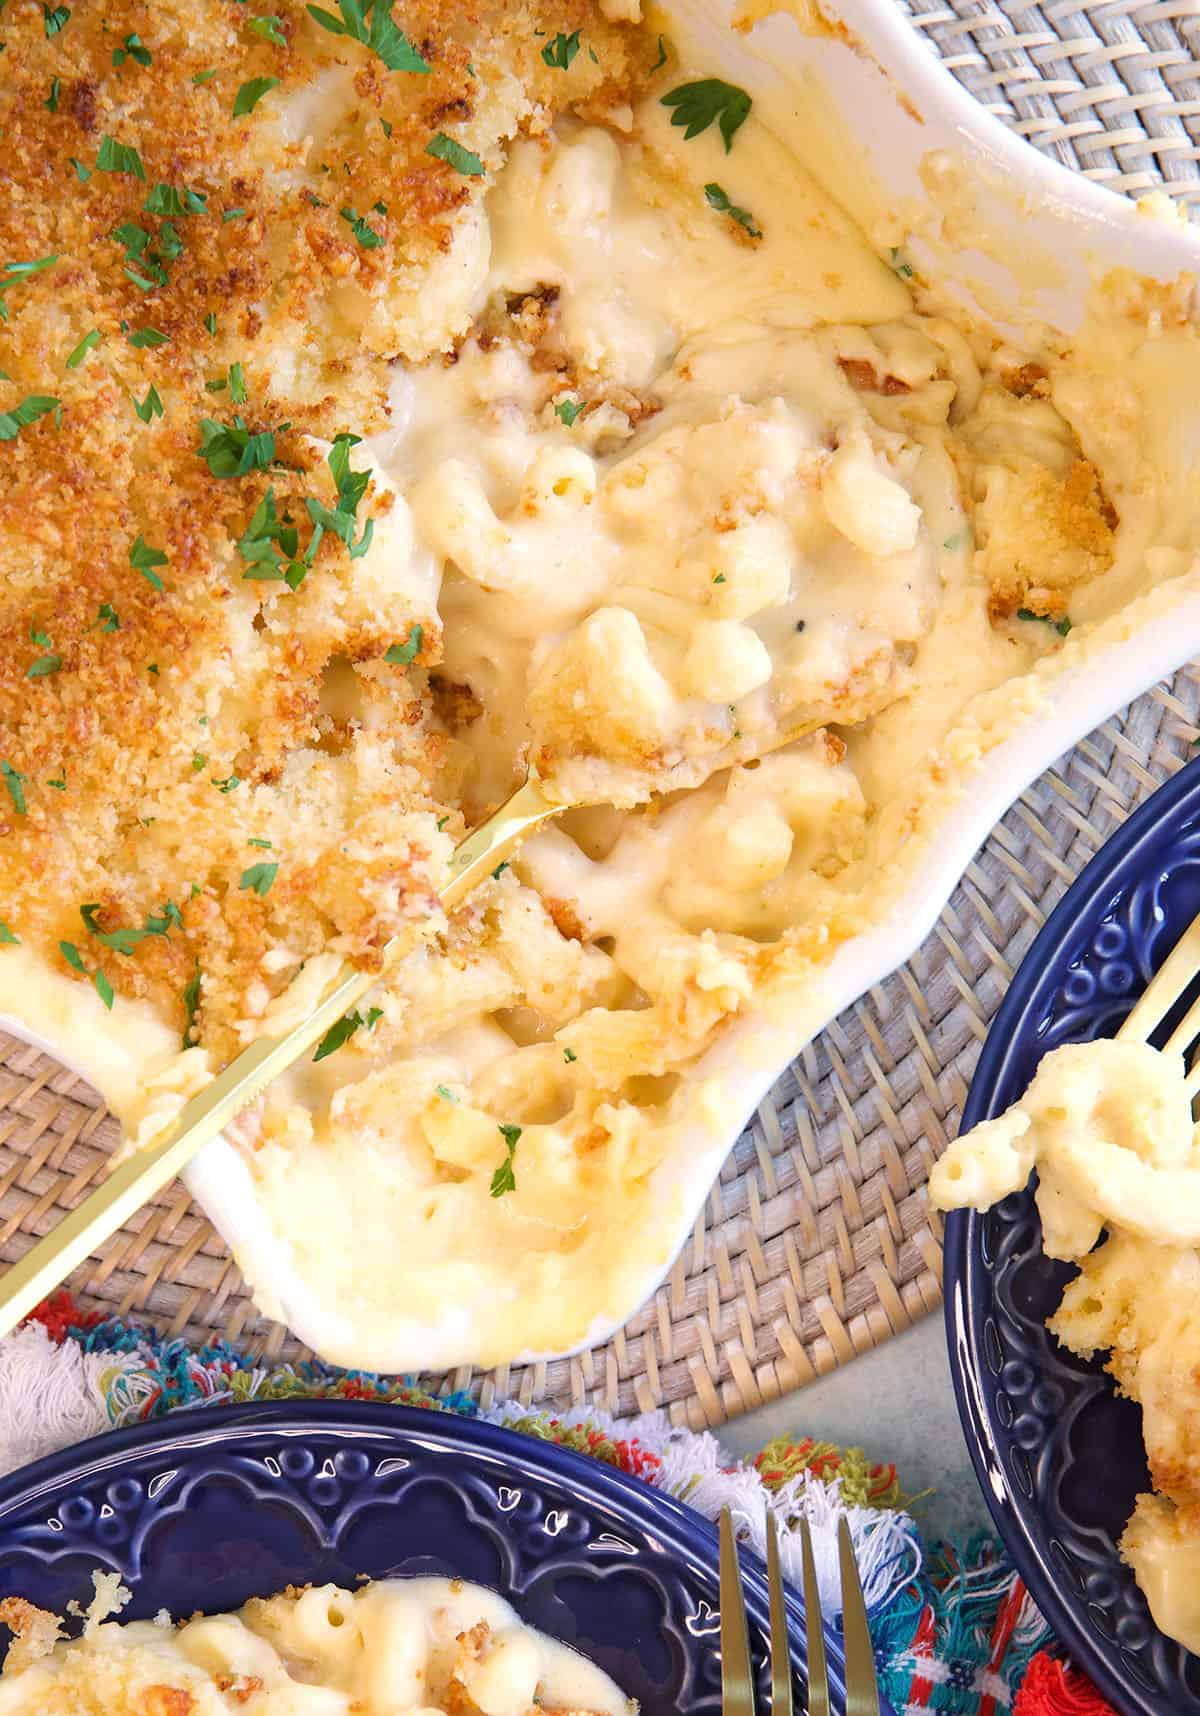 Five cheese baked Mac and cheese in a white casserole dish with a gold serving spoon in it.